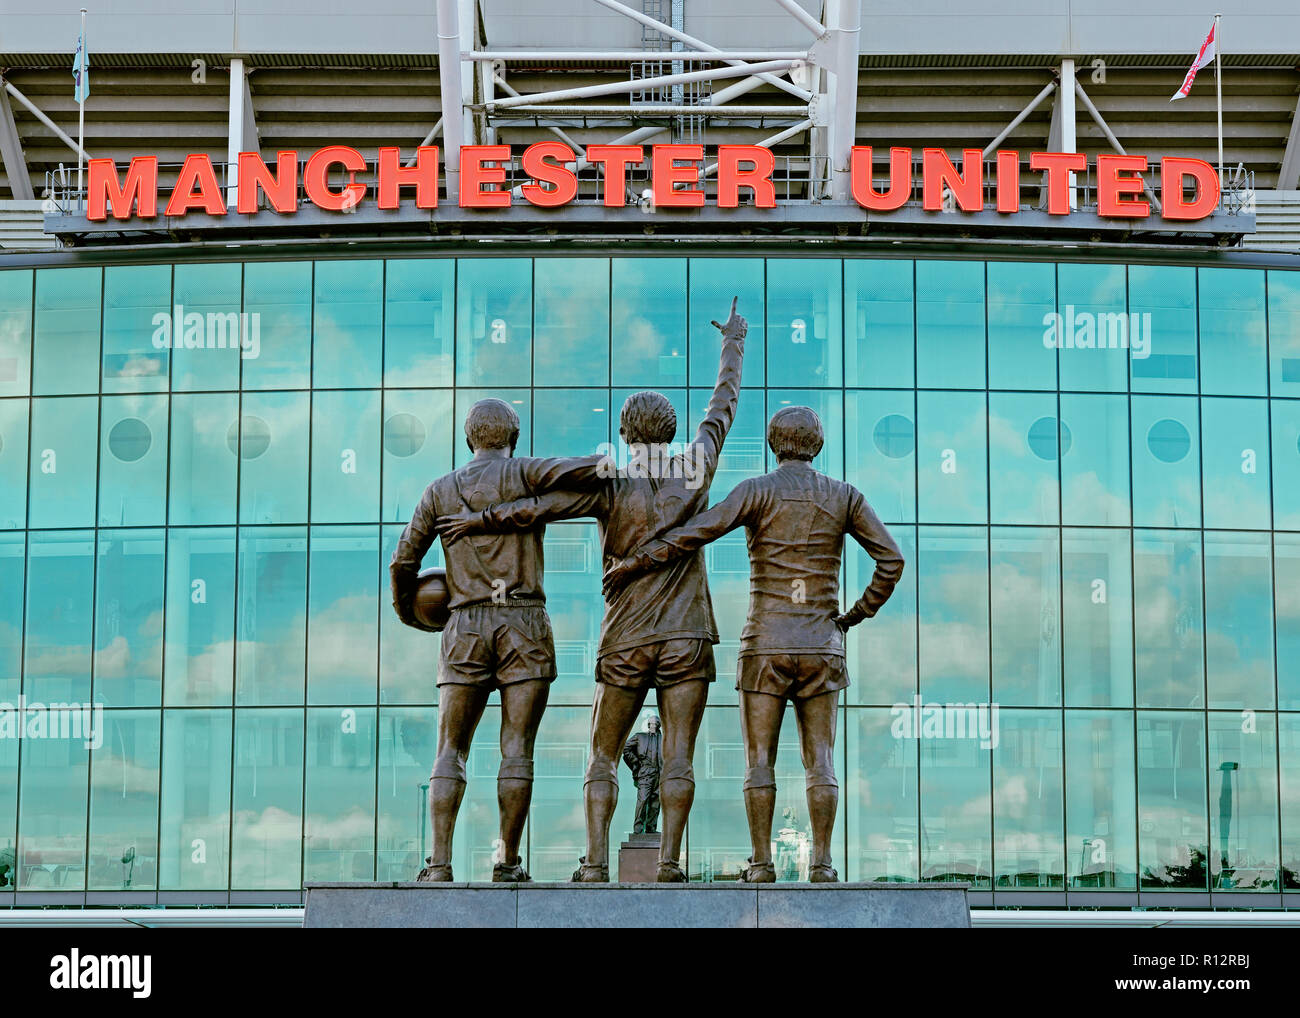 Old Trafford, stade de Manchester United Football Club, Angleterre, Royaume-Uni Banque D'Images